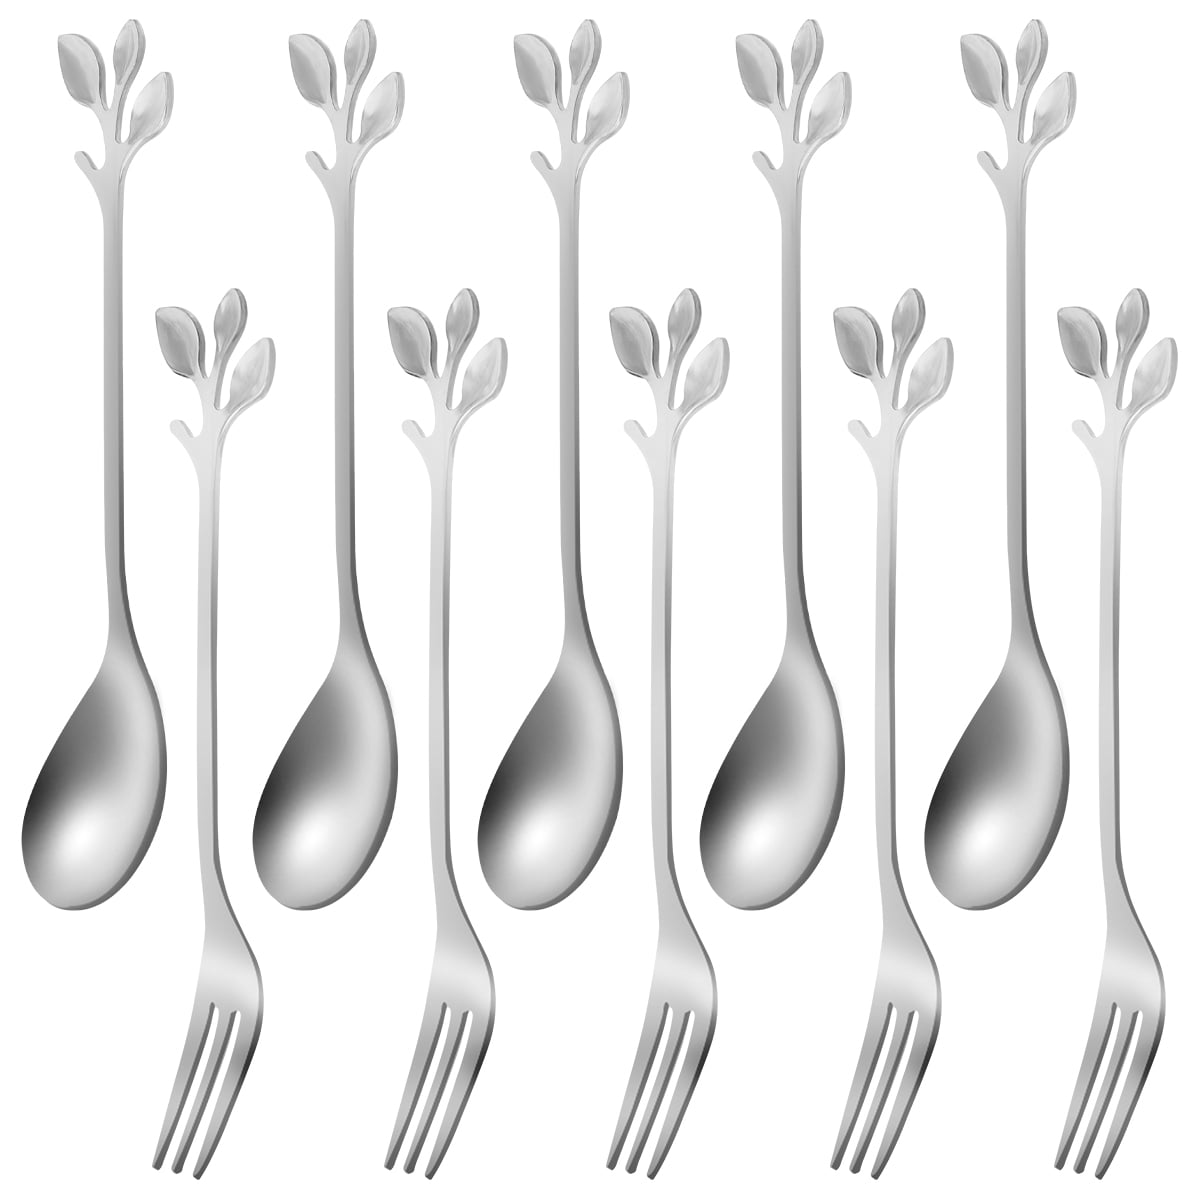 12x STAINLESS STEEL FORKS Pastry Dessert Cake Food Kitchen Silver Cutlery Set 